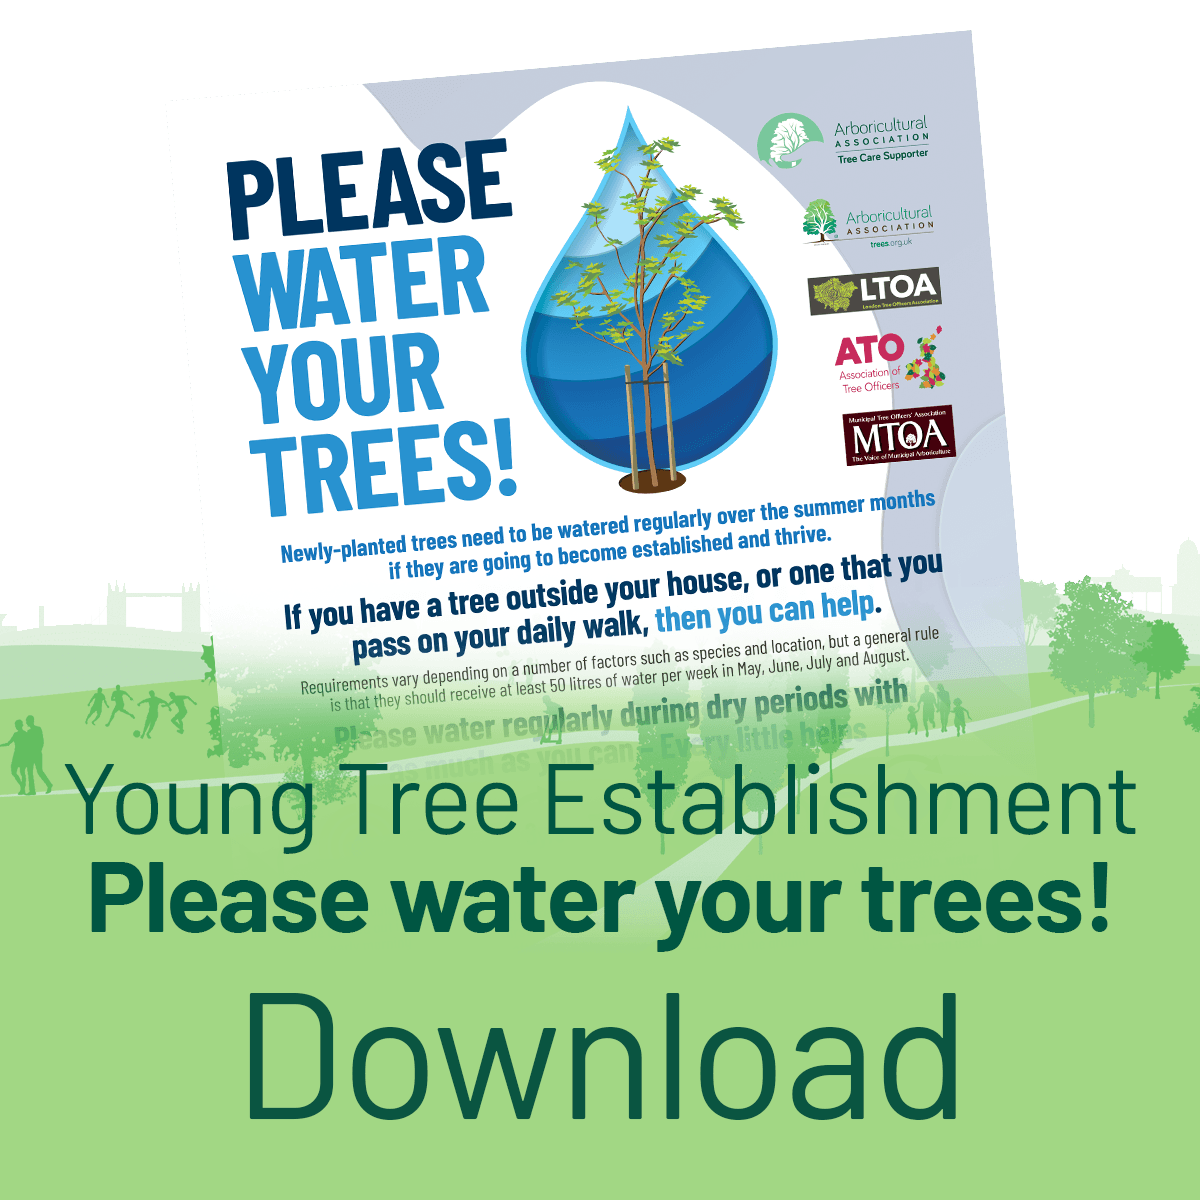 Download the Young Tree Watering Poster